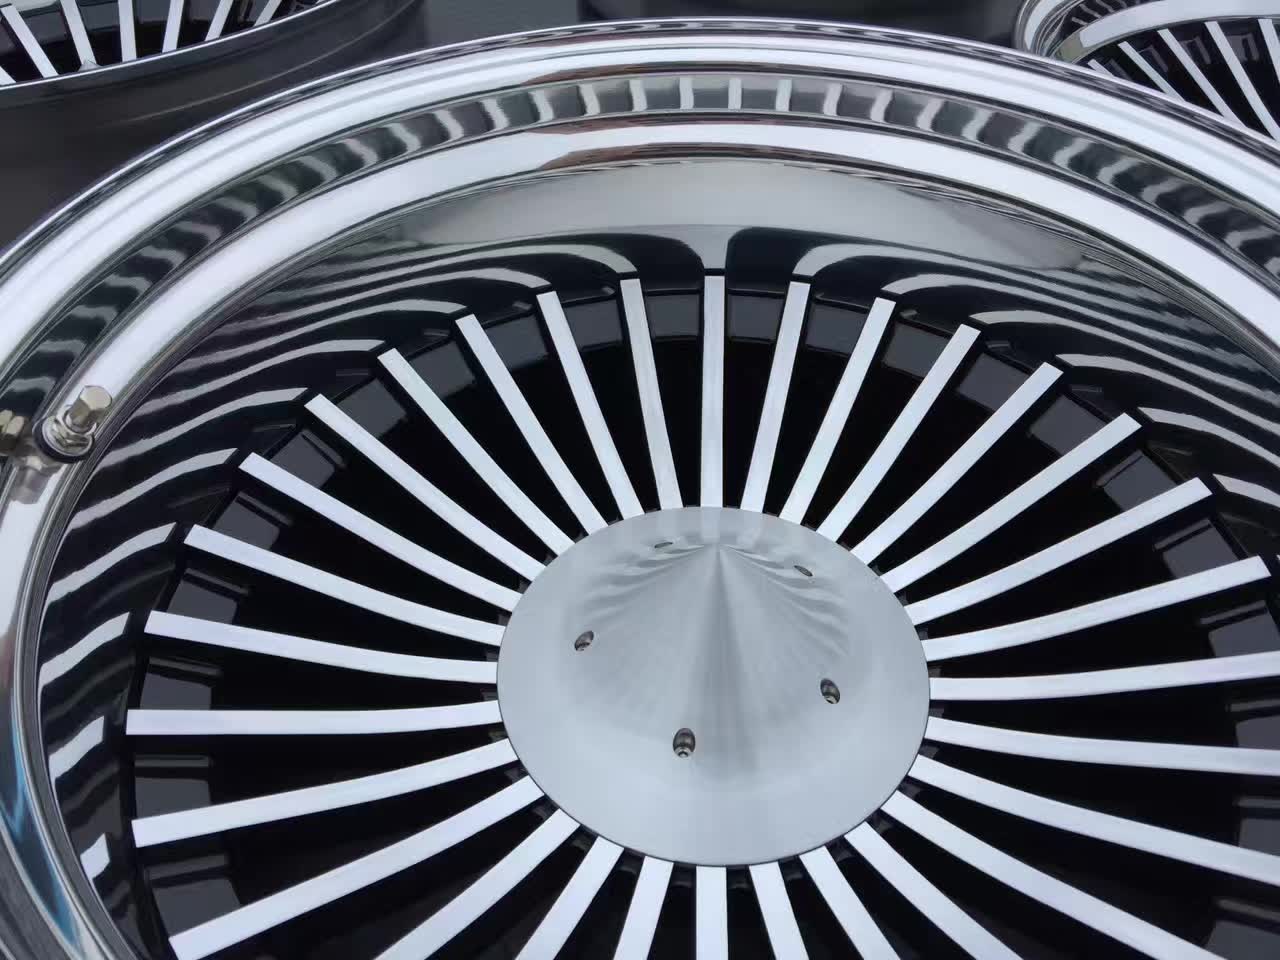 Turbofan Engine Design 23 Inch Deep Dish For Land Rover and Rolls Royce